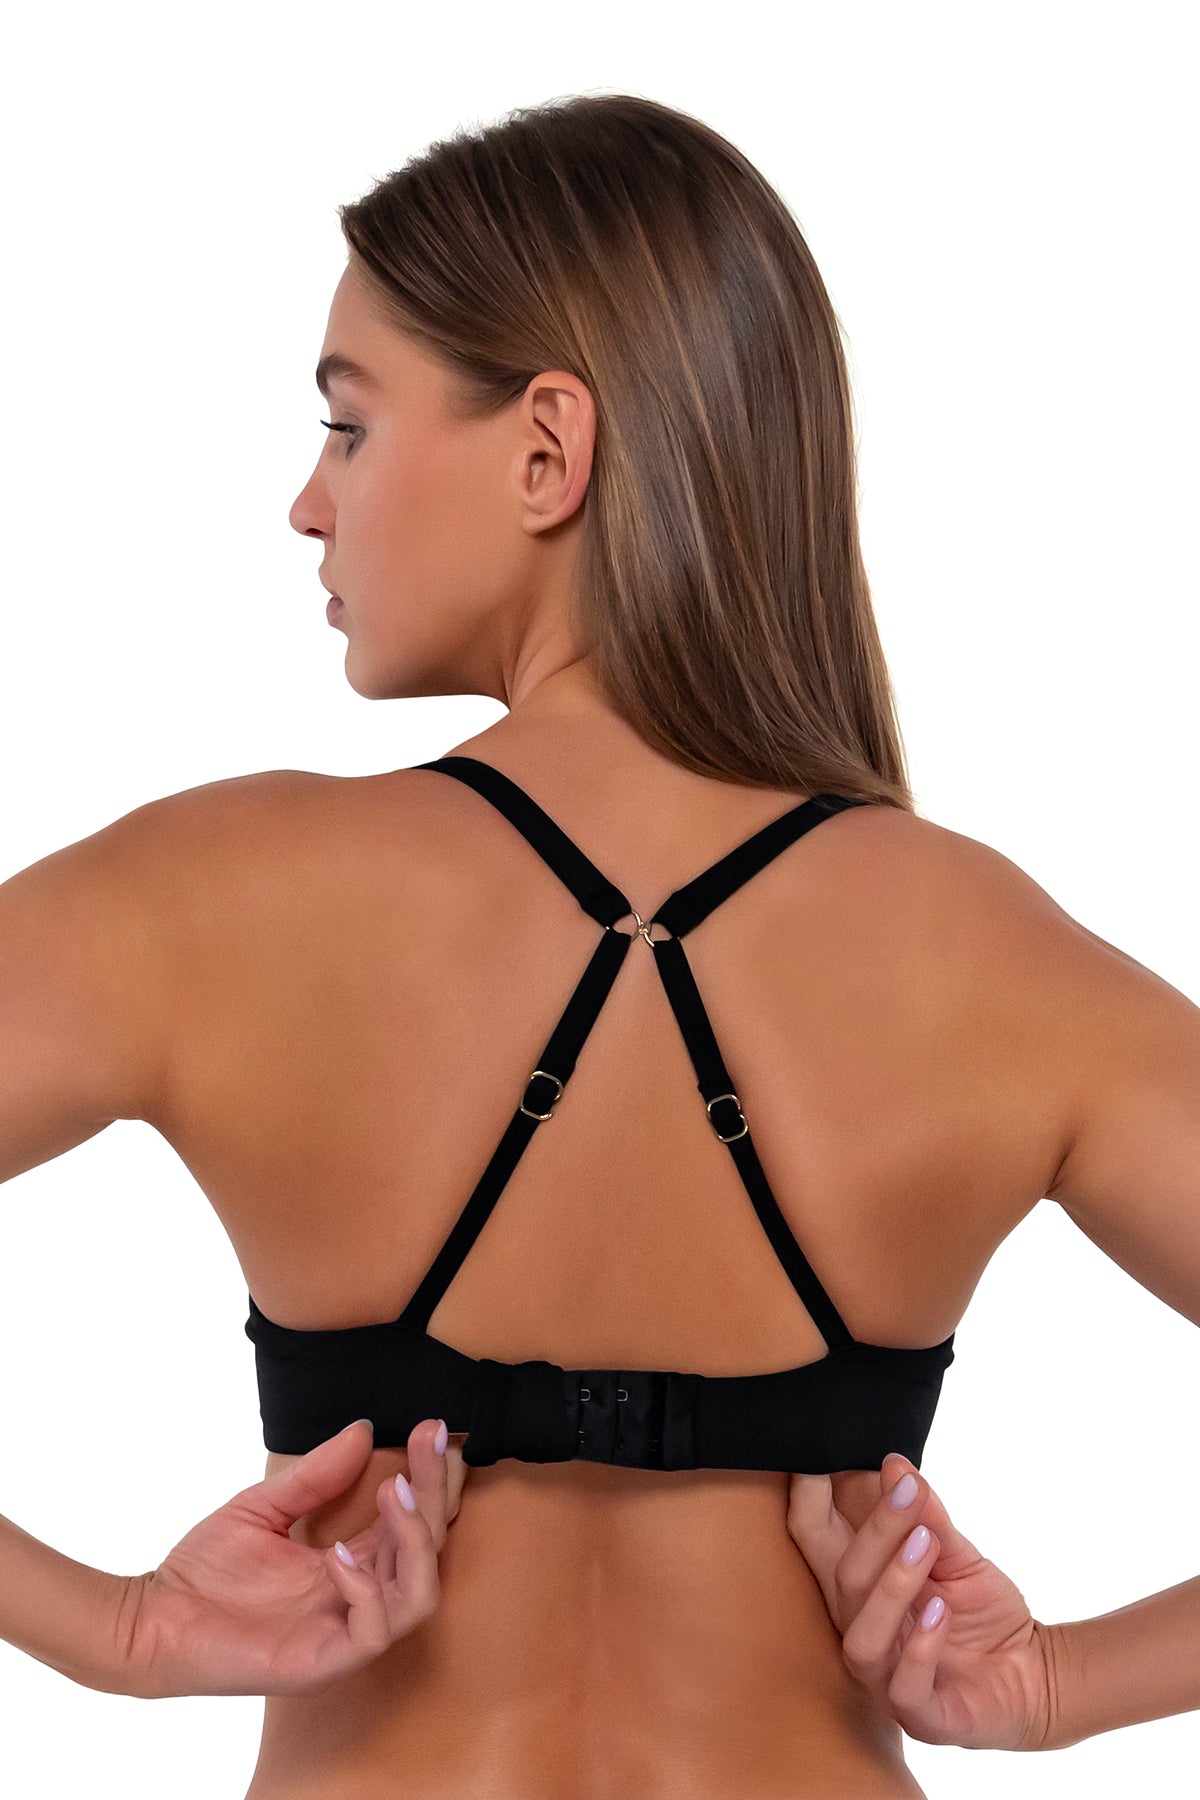 Back pose #1 of Daria wearing Sunsets Black Juliette Underwire Top showing hidden hook-and-eye closure